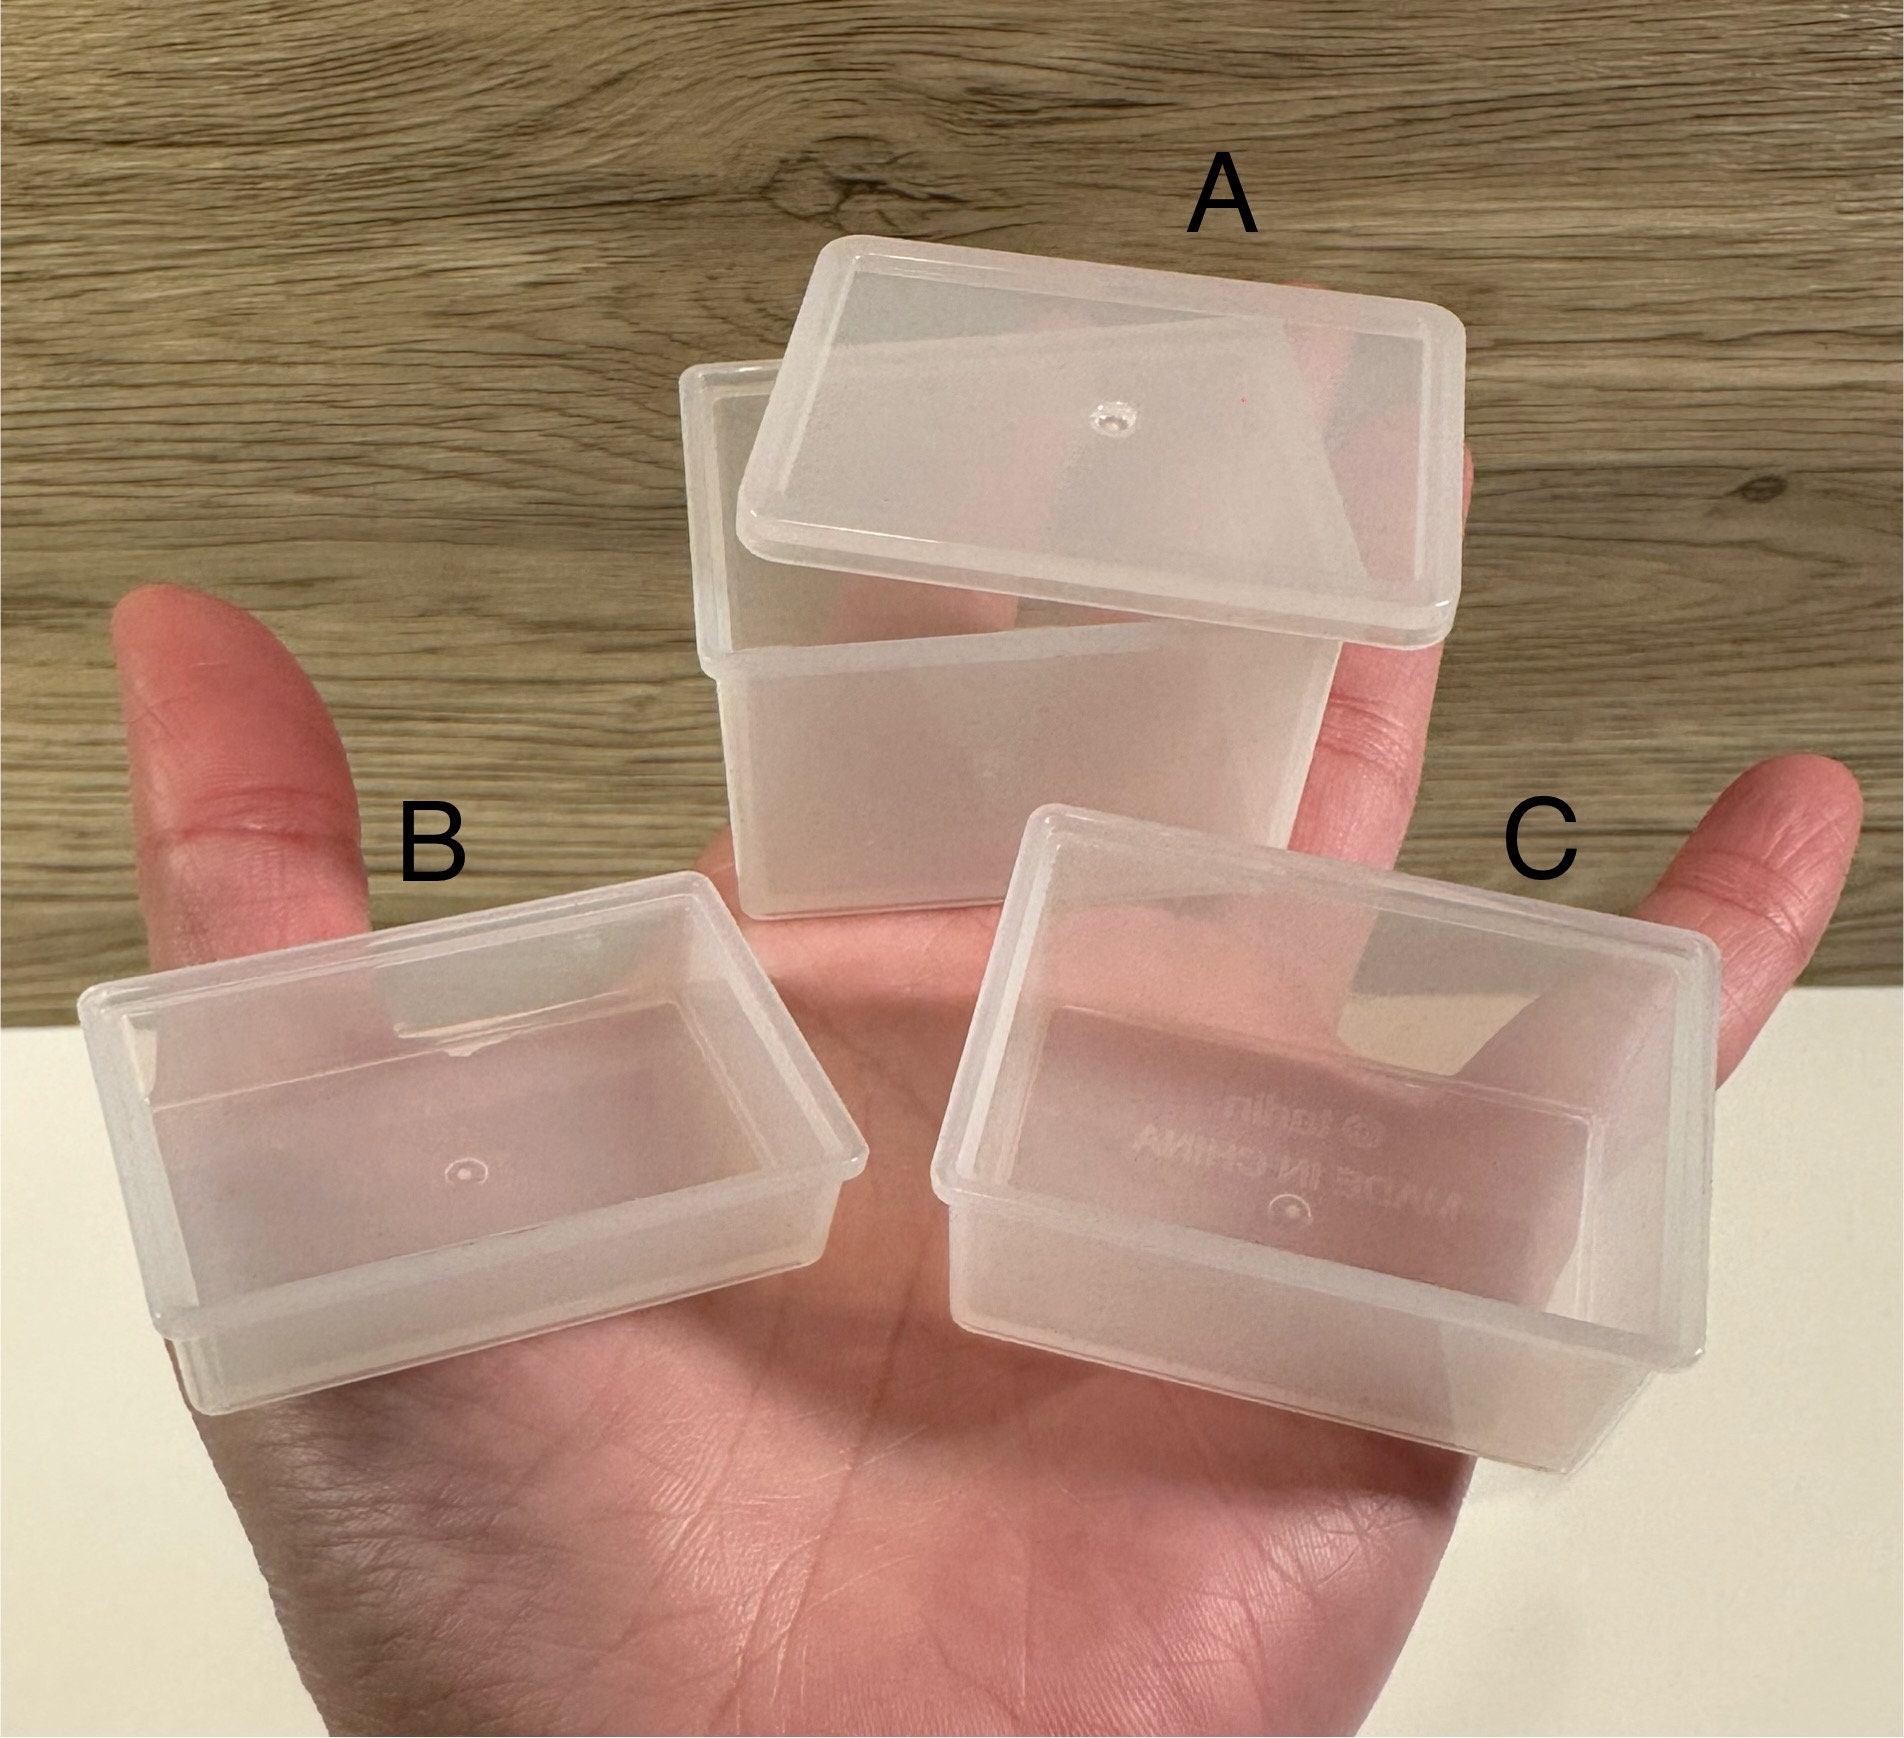 6pcs/set 1/6 or 1/12 Scale Miniature Dollhouse Storage Box Mini Container  for Barbies OB11 Doll House Furniture Accessories Toy